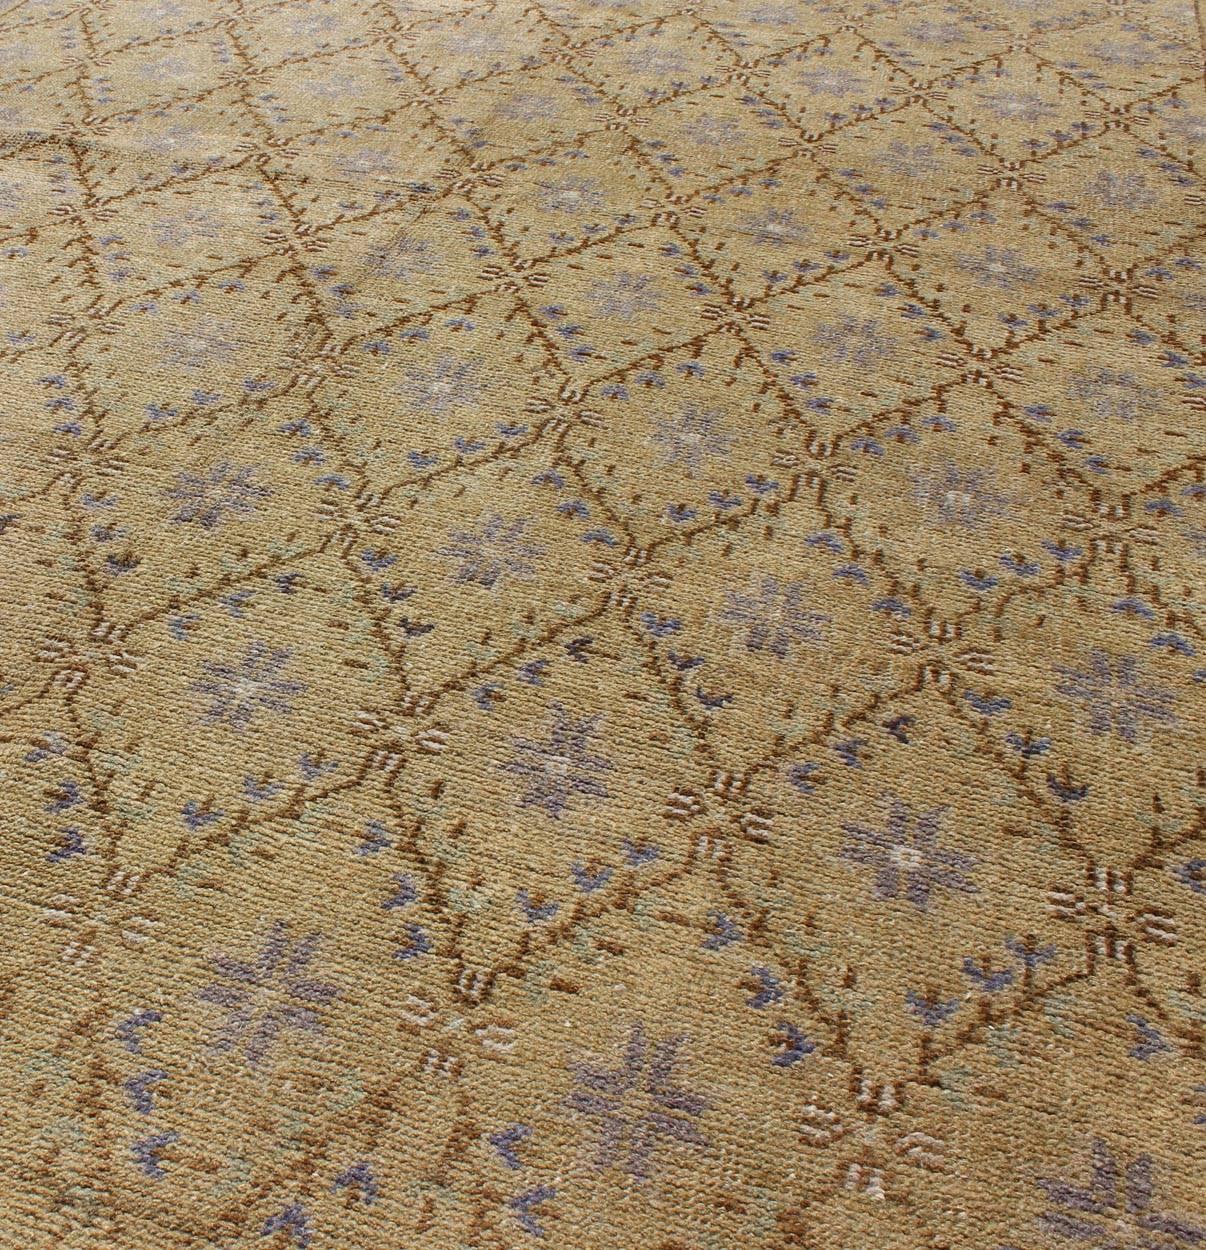 Mid-20th Century Vintage Turkish Oushak Rug with Lattice Blossom Design in Camel and Gray Colors For Sale